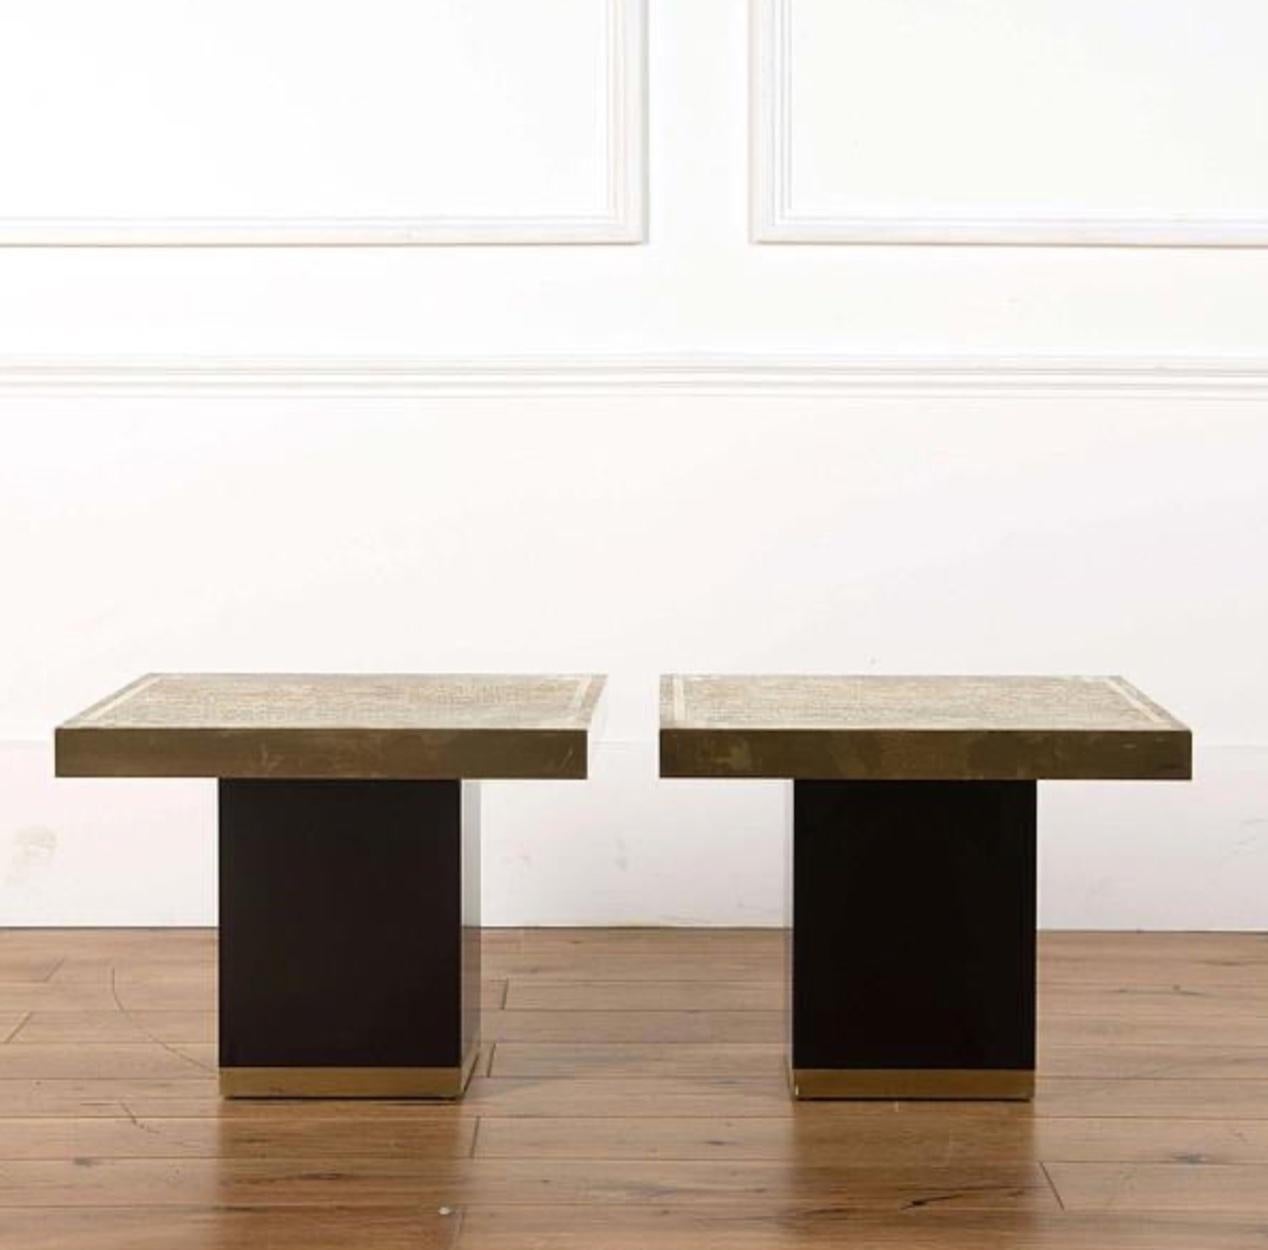 Pair of stylish Paco Rabanne 1970s side or end tables with shiny black cube bases, wrapped brass accenting, and thick square surface tops. A sleek and graphic set with wonderful sharp modern lines. 

Spain, circa 1970

Dimensions: 16H x 21W x